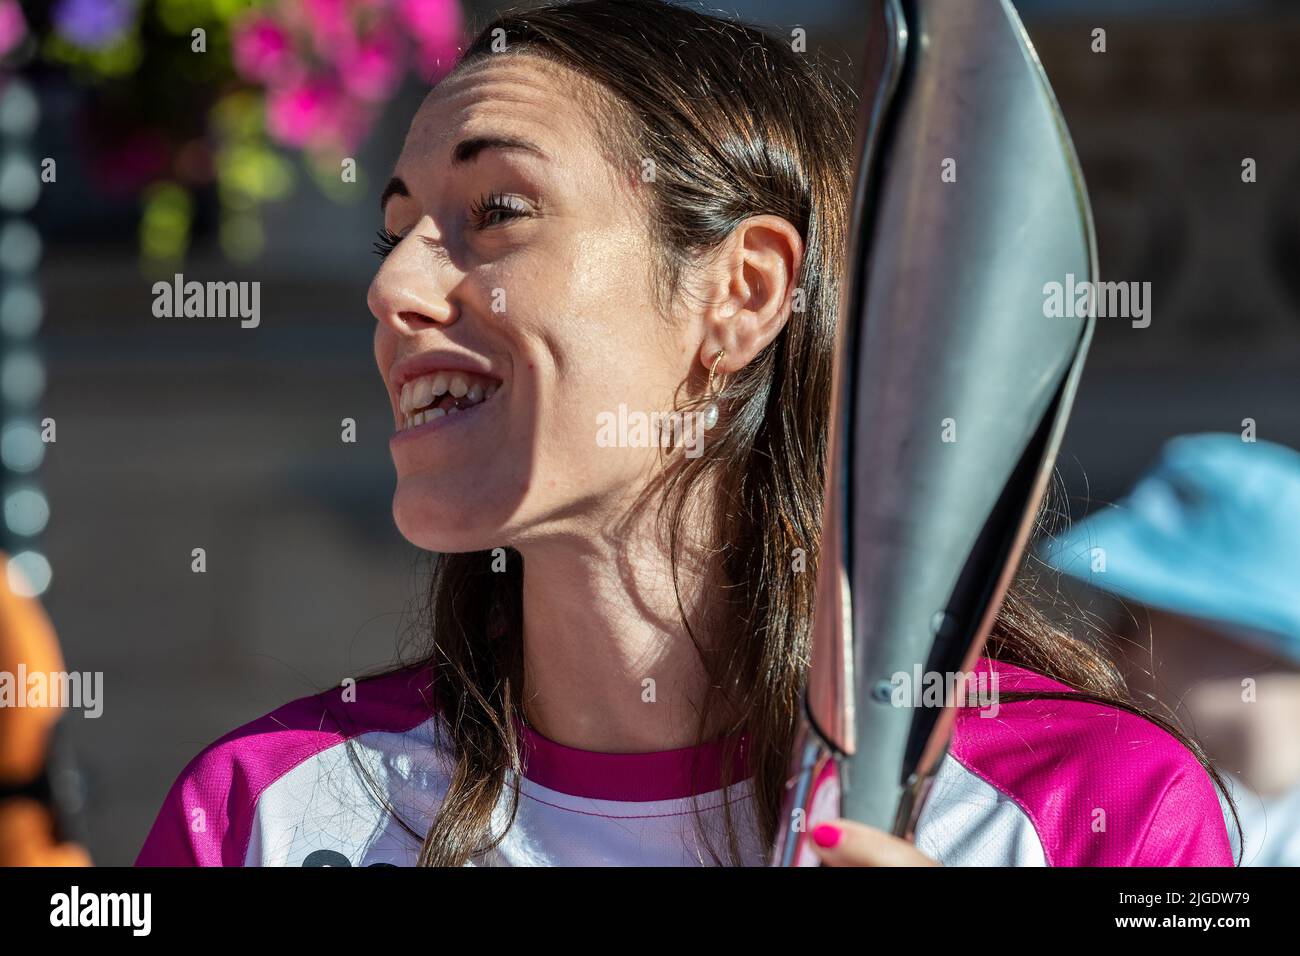 Northampton 10th July 2022. Commonwealth Games Queen’s Baton Relay going through the town centre with Olympic badminton player Chloe Birch while on it’s way to the The Birmingham 2022 Commonwealth Games.  Credit: Keith J Smith./Alamy Live News. Stock Photo